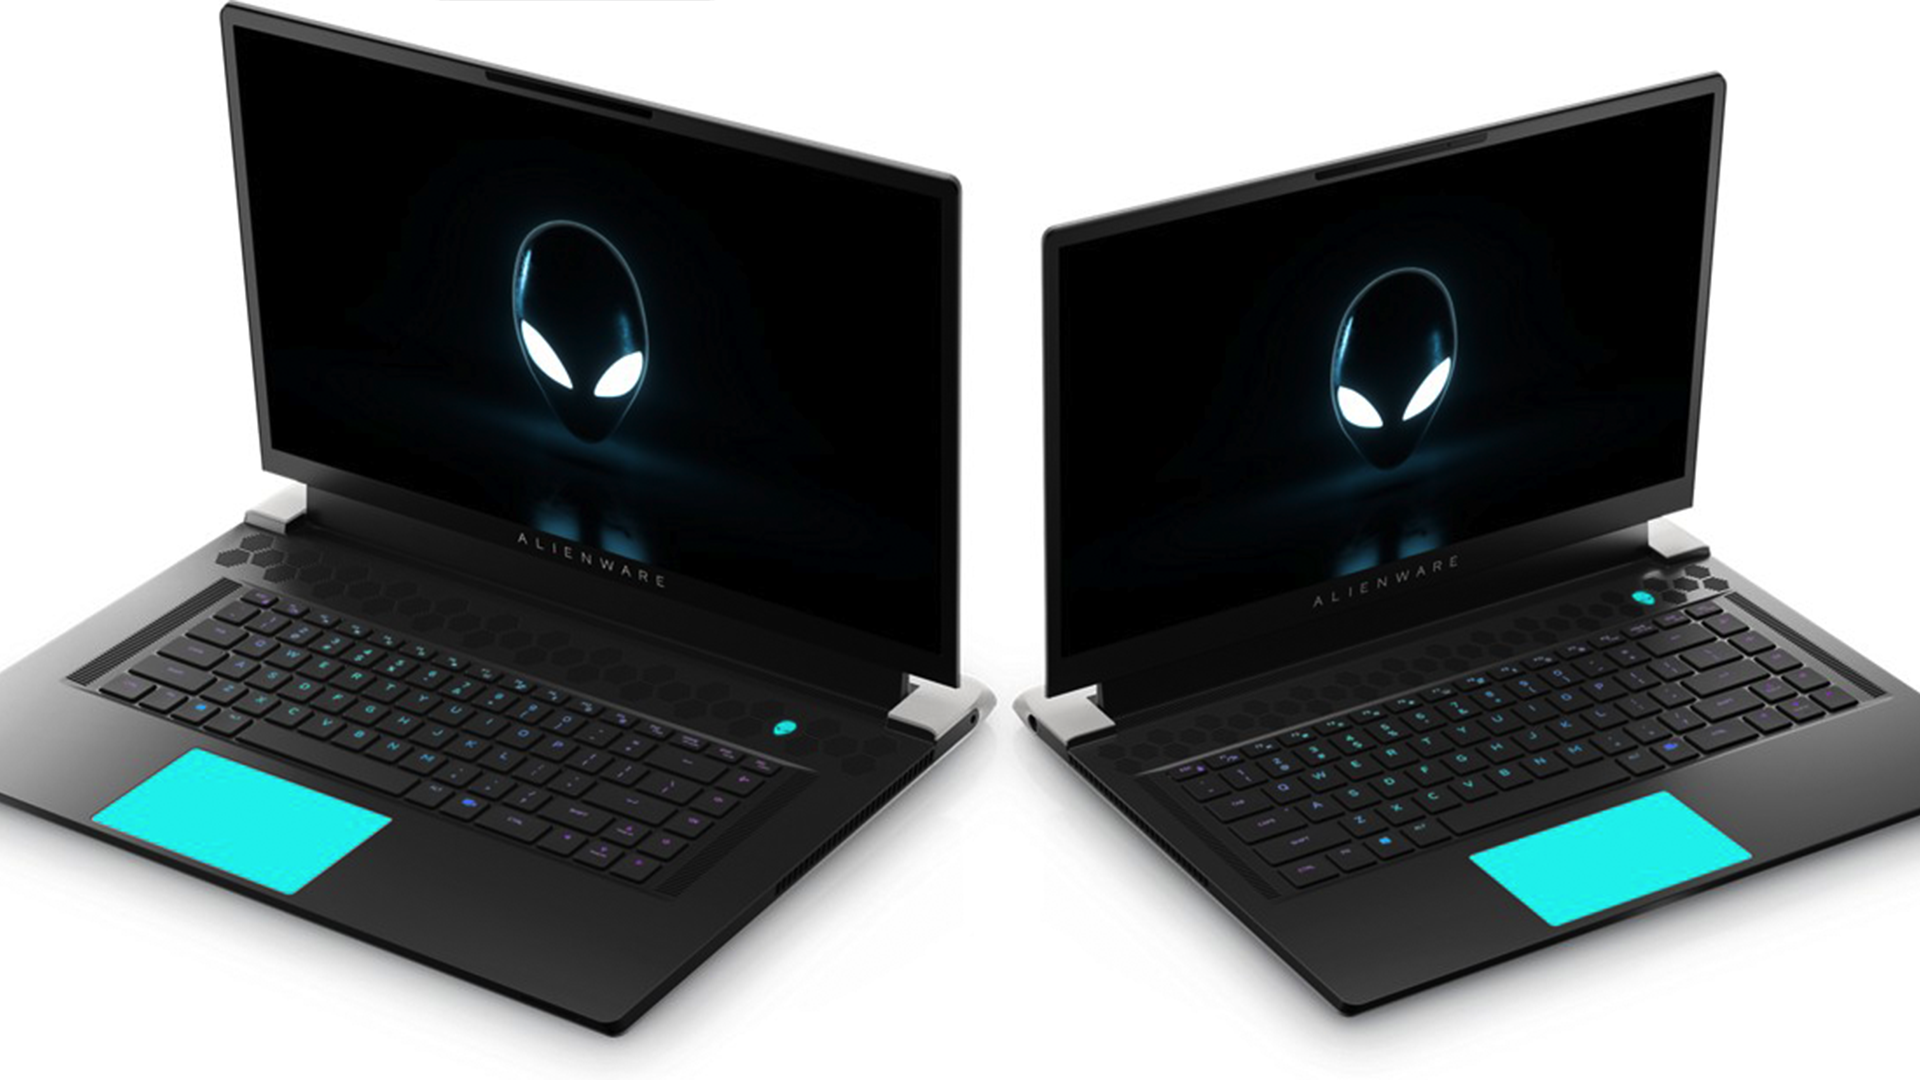 Alienware Launches Its Thinnest Gaming Laptops Yet